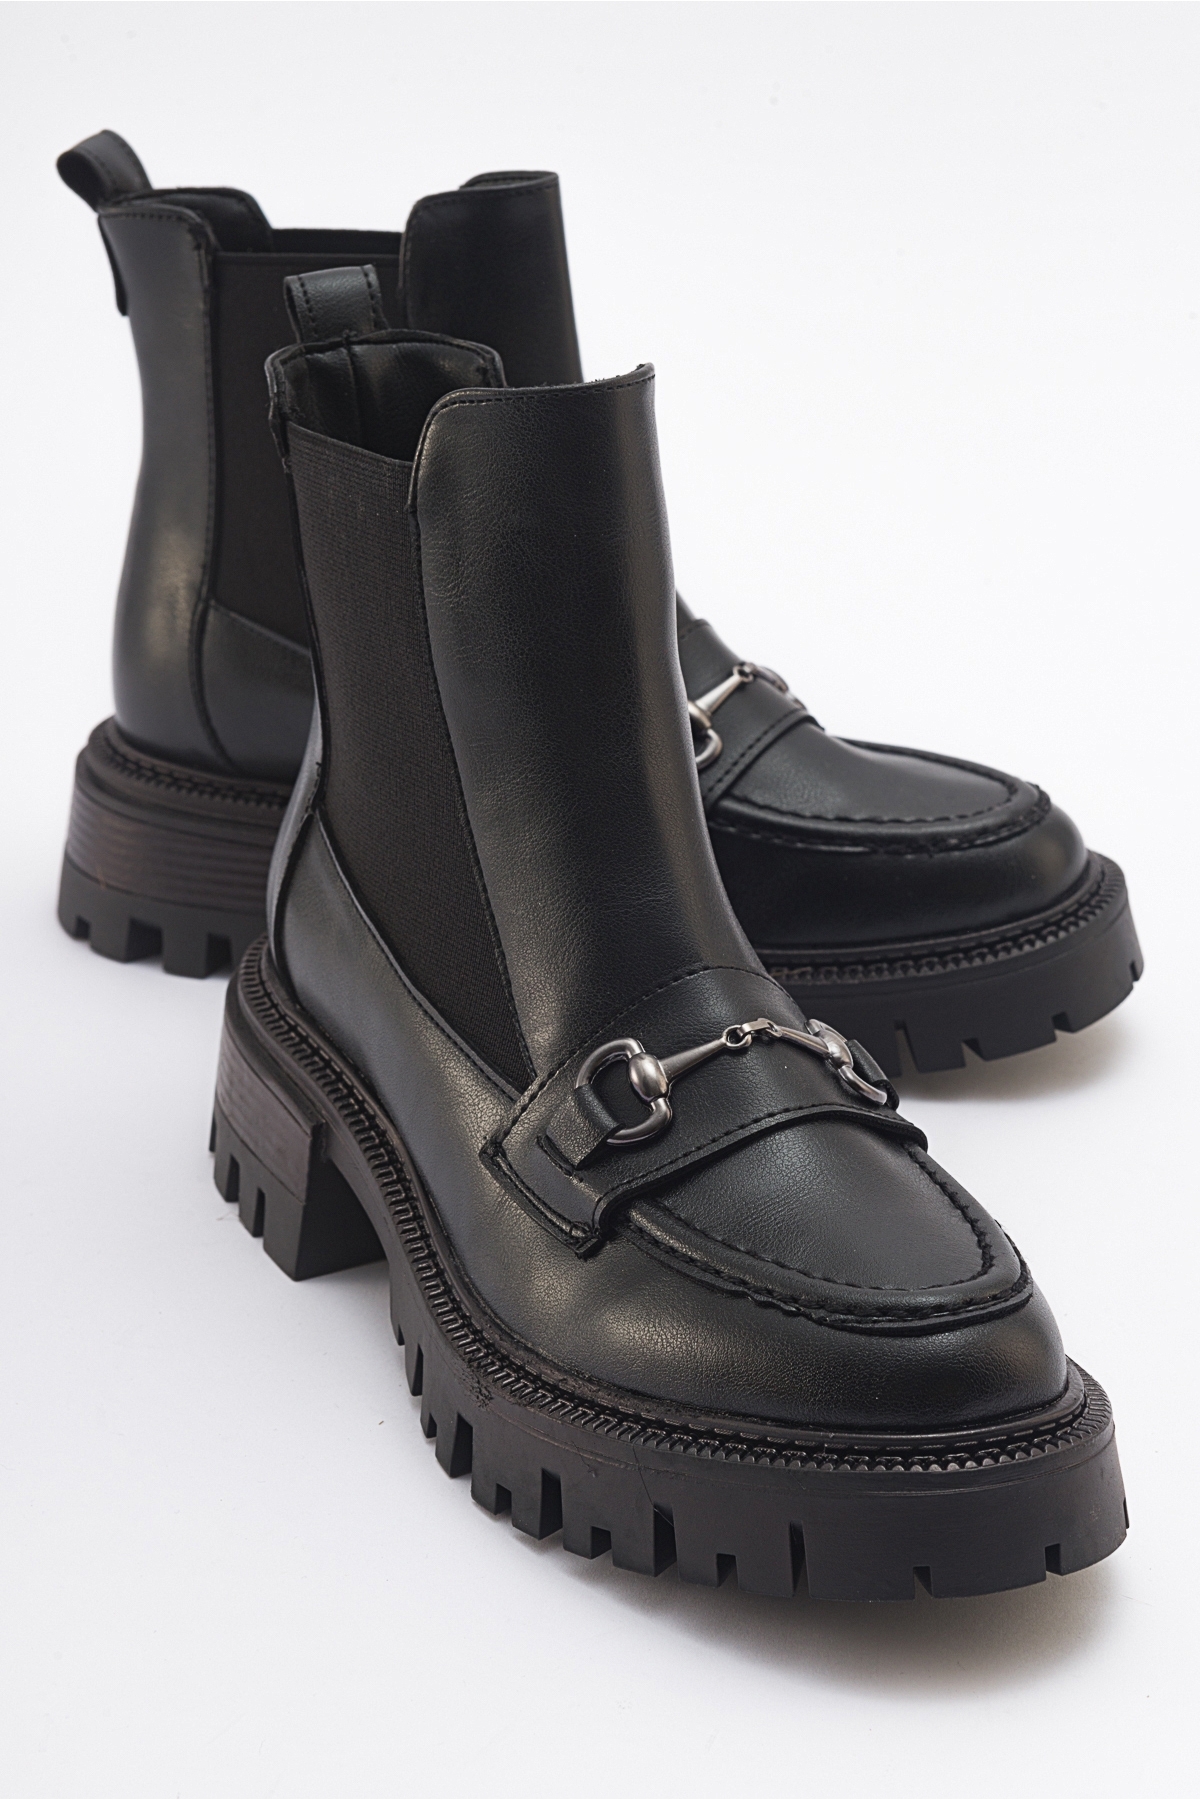 LuviShoes VESPER Womens Black Chelsea Boots with Buckle.